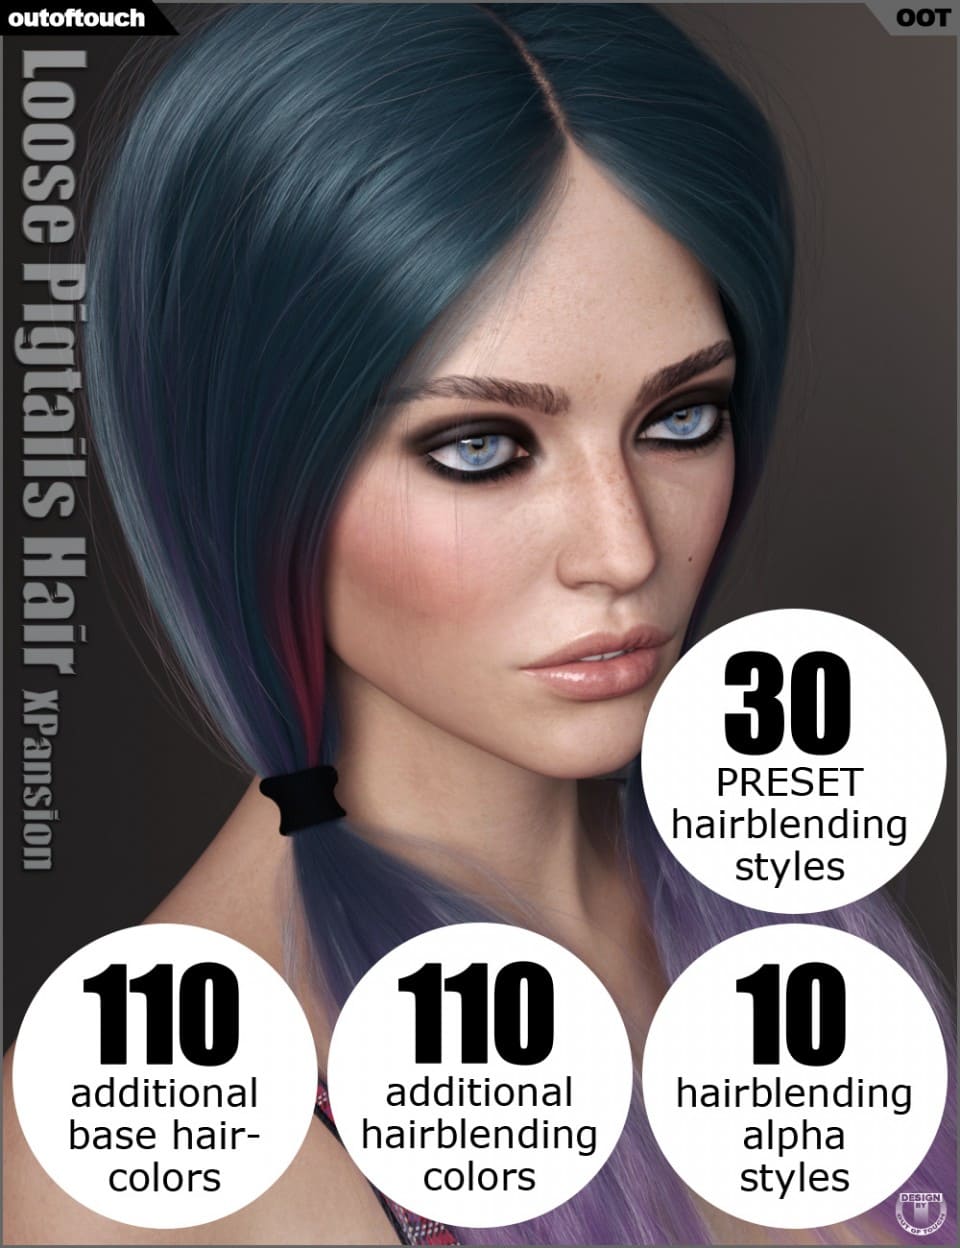 OOT Hairblending 2.0 Texture XPansion for Loose Pigtails Hair_DAZ3DDL